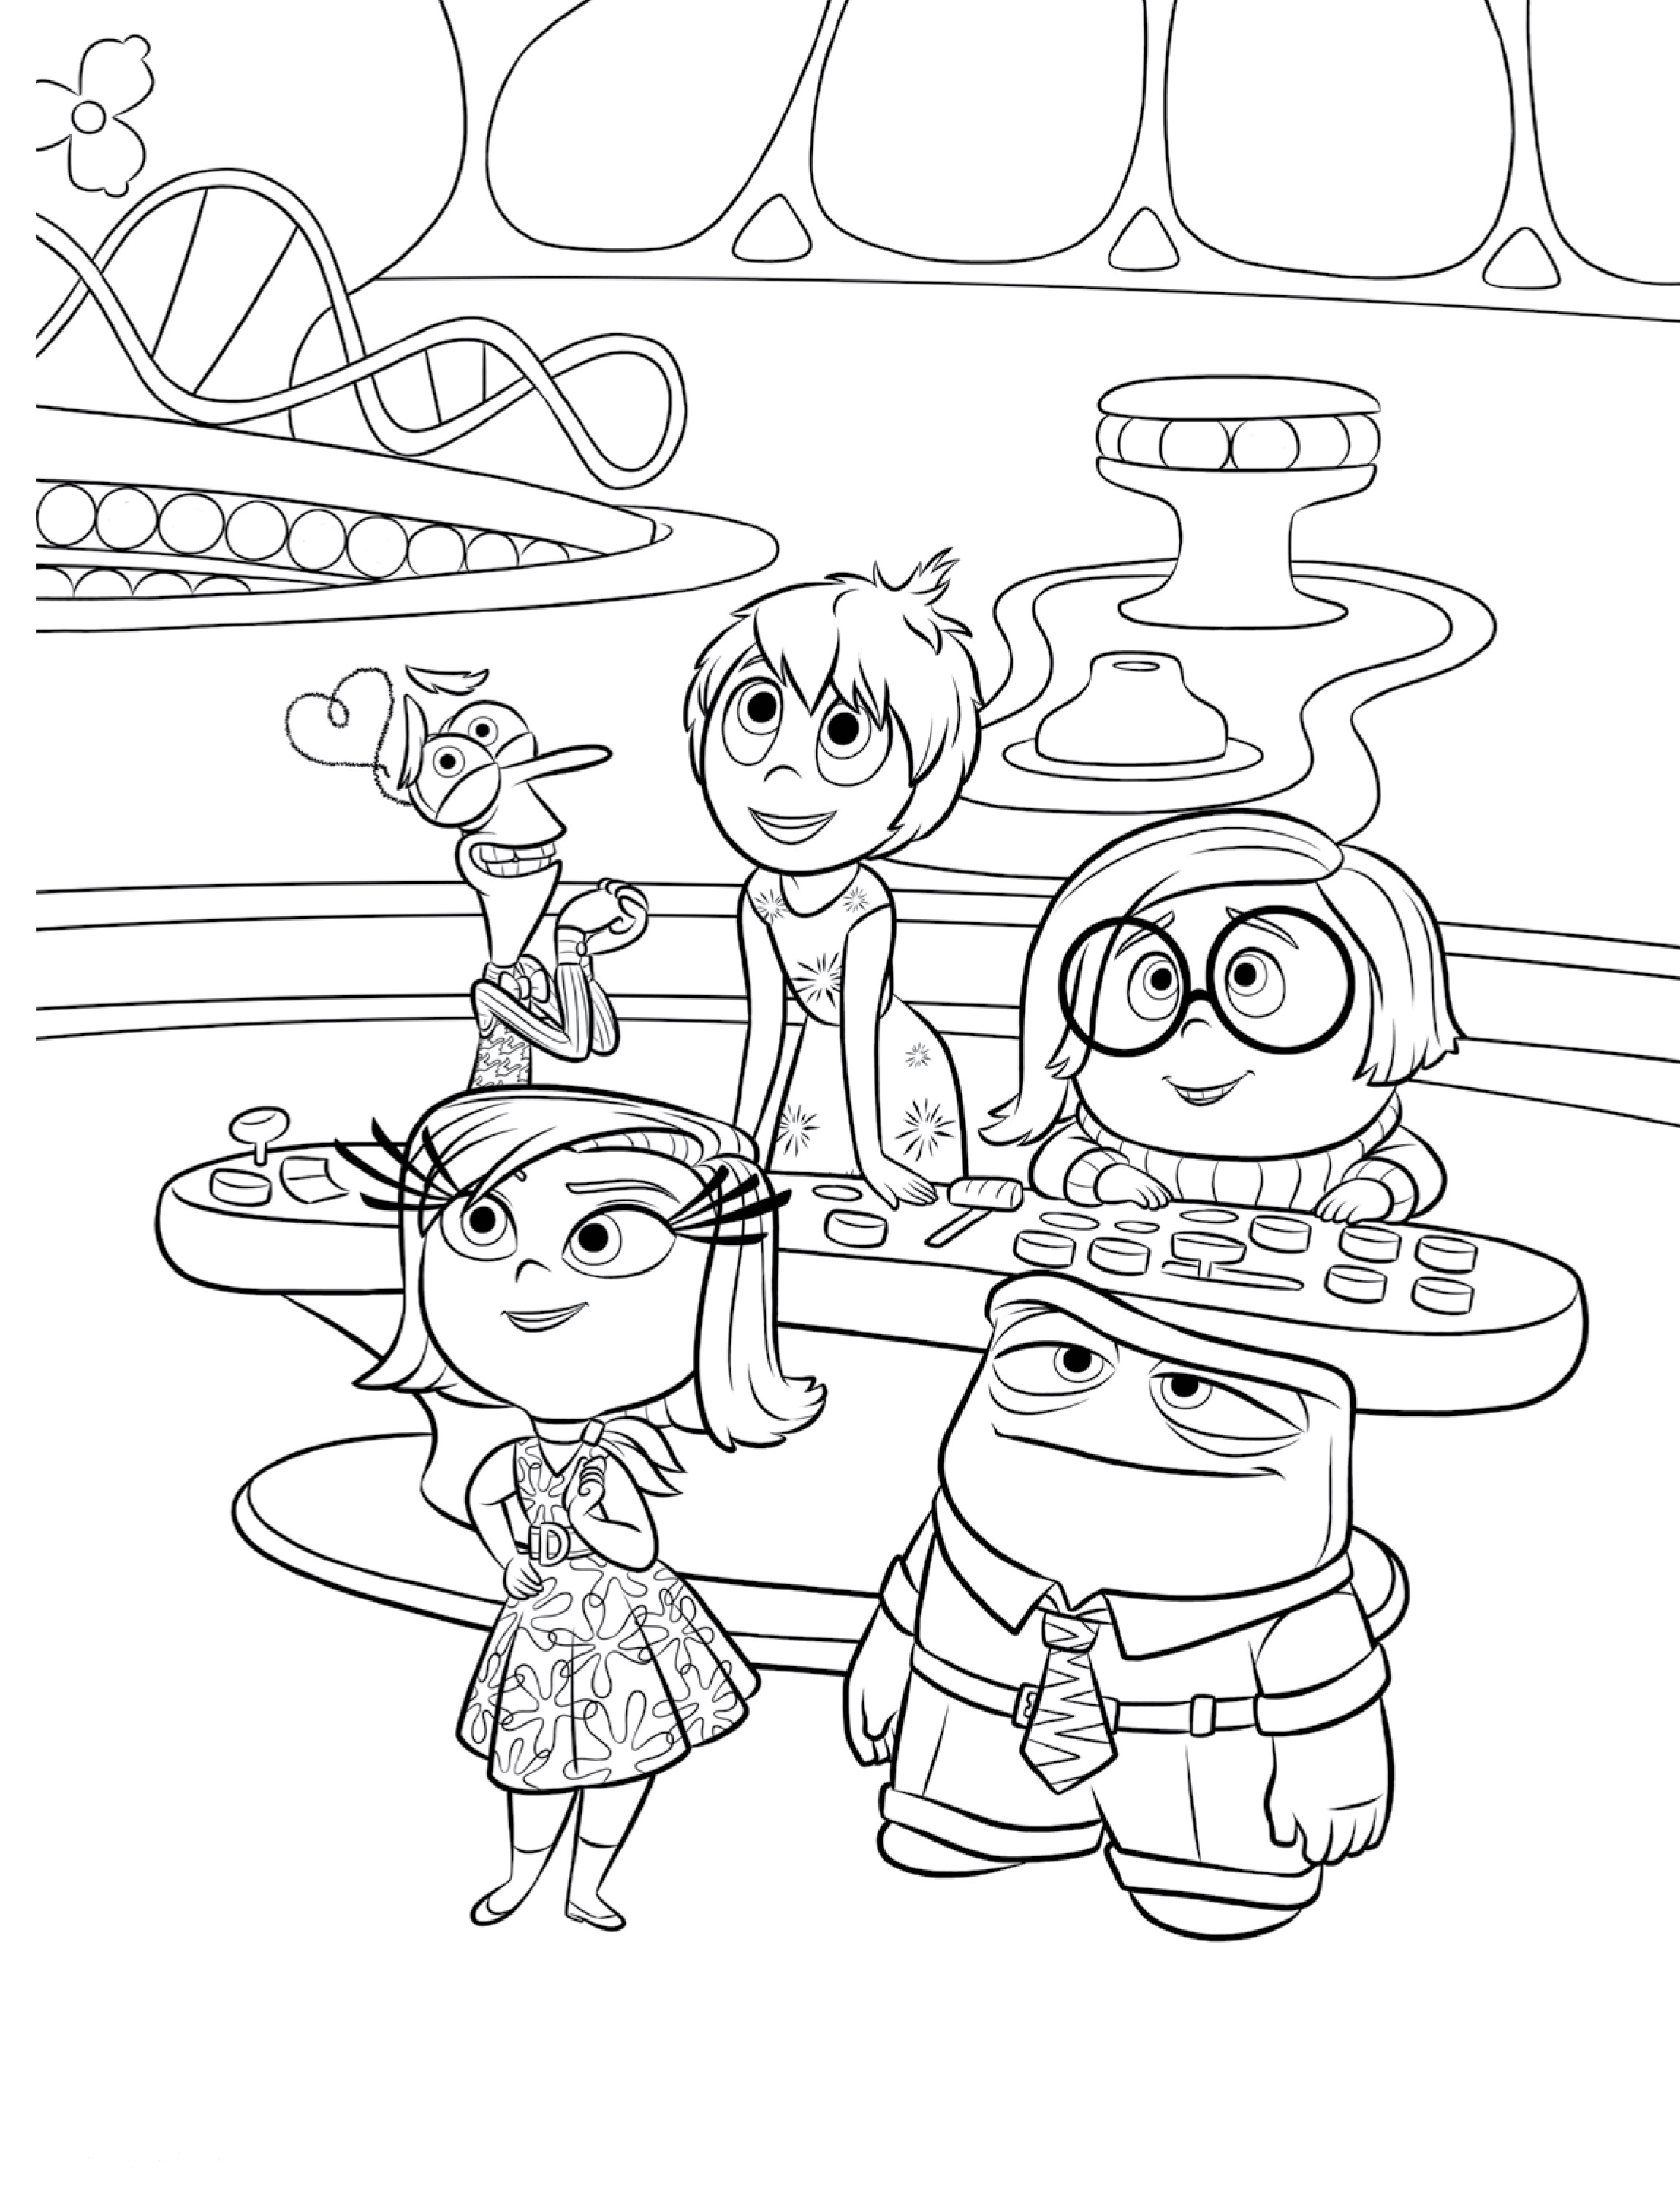 Print Out Coloring Book Pages
 Inside Out Coloring Pages Best Coloring Pages For Kids